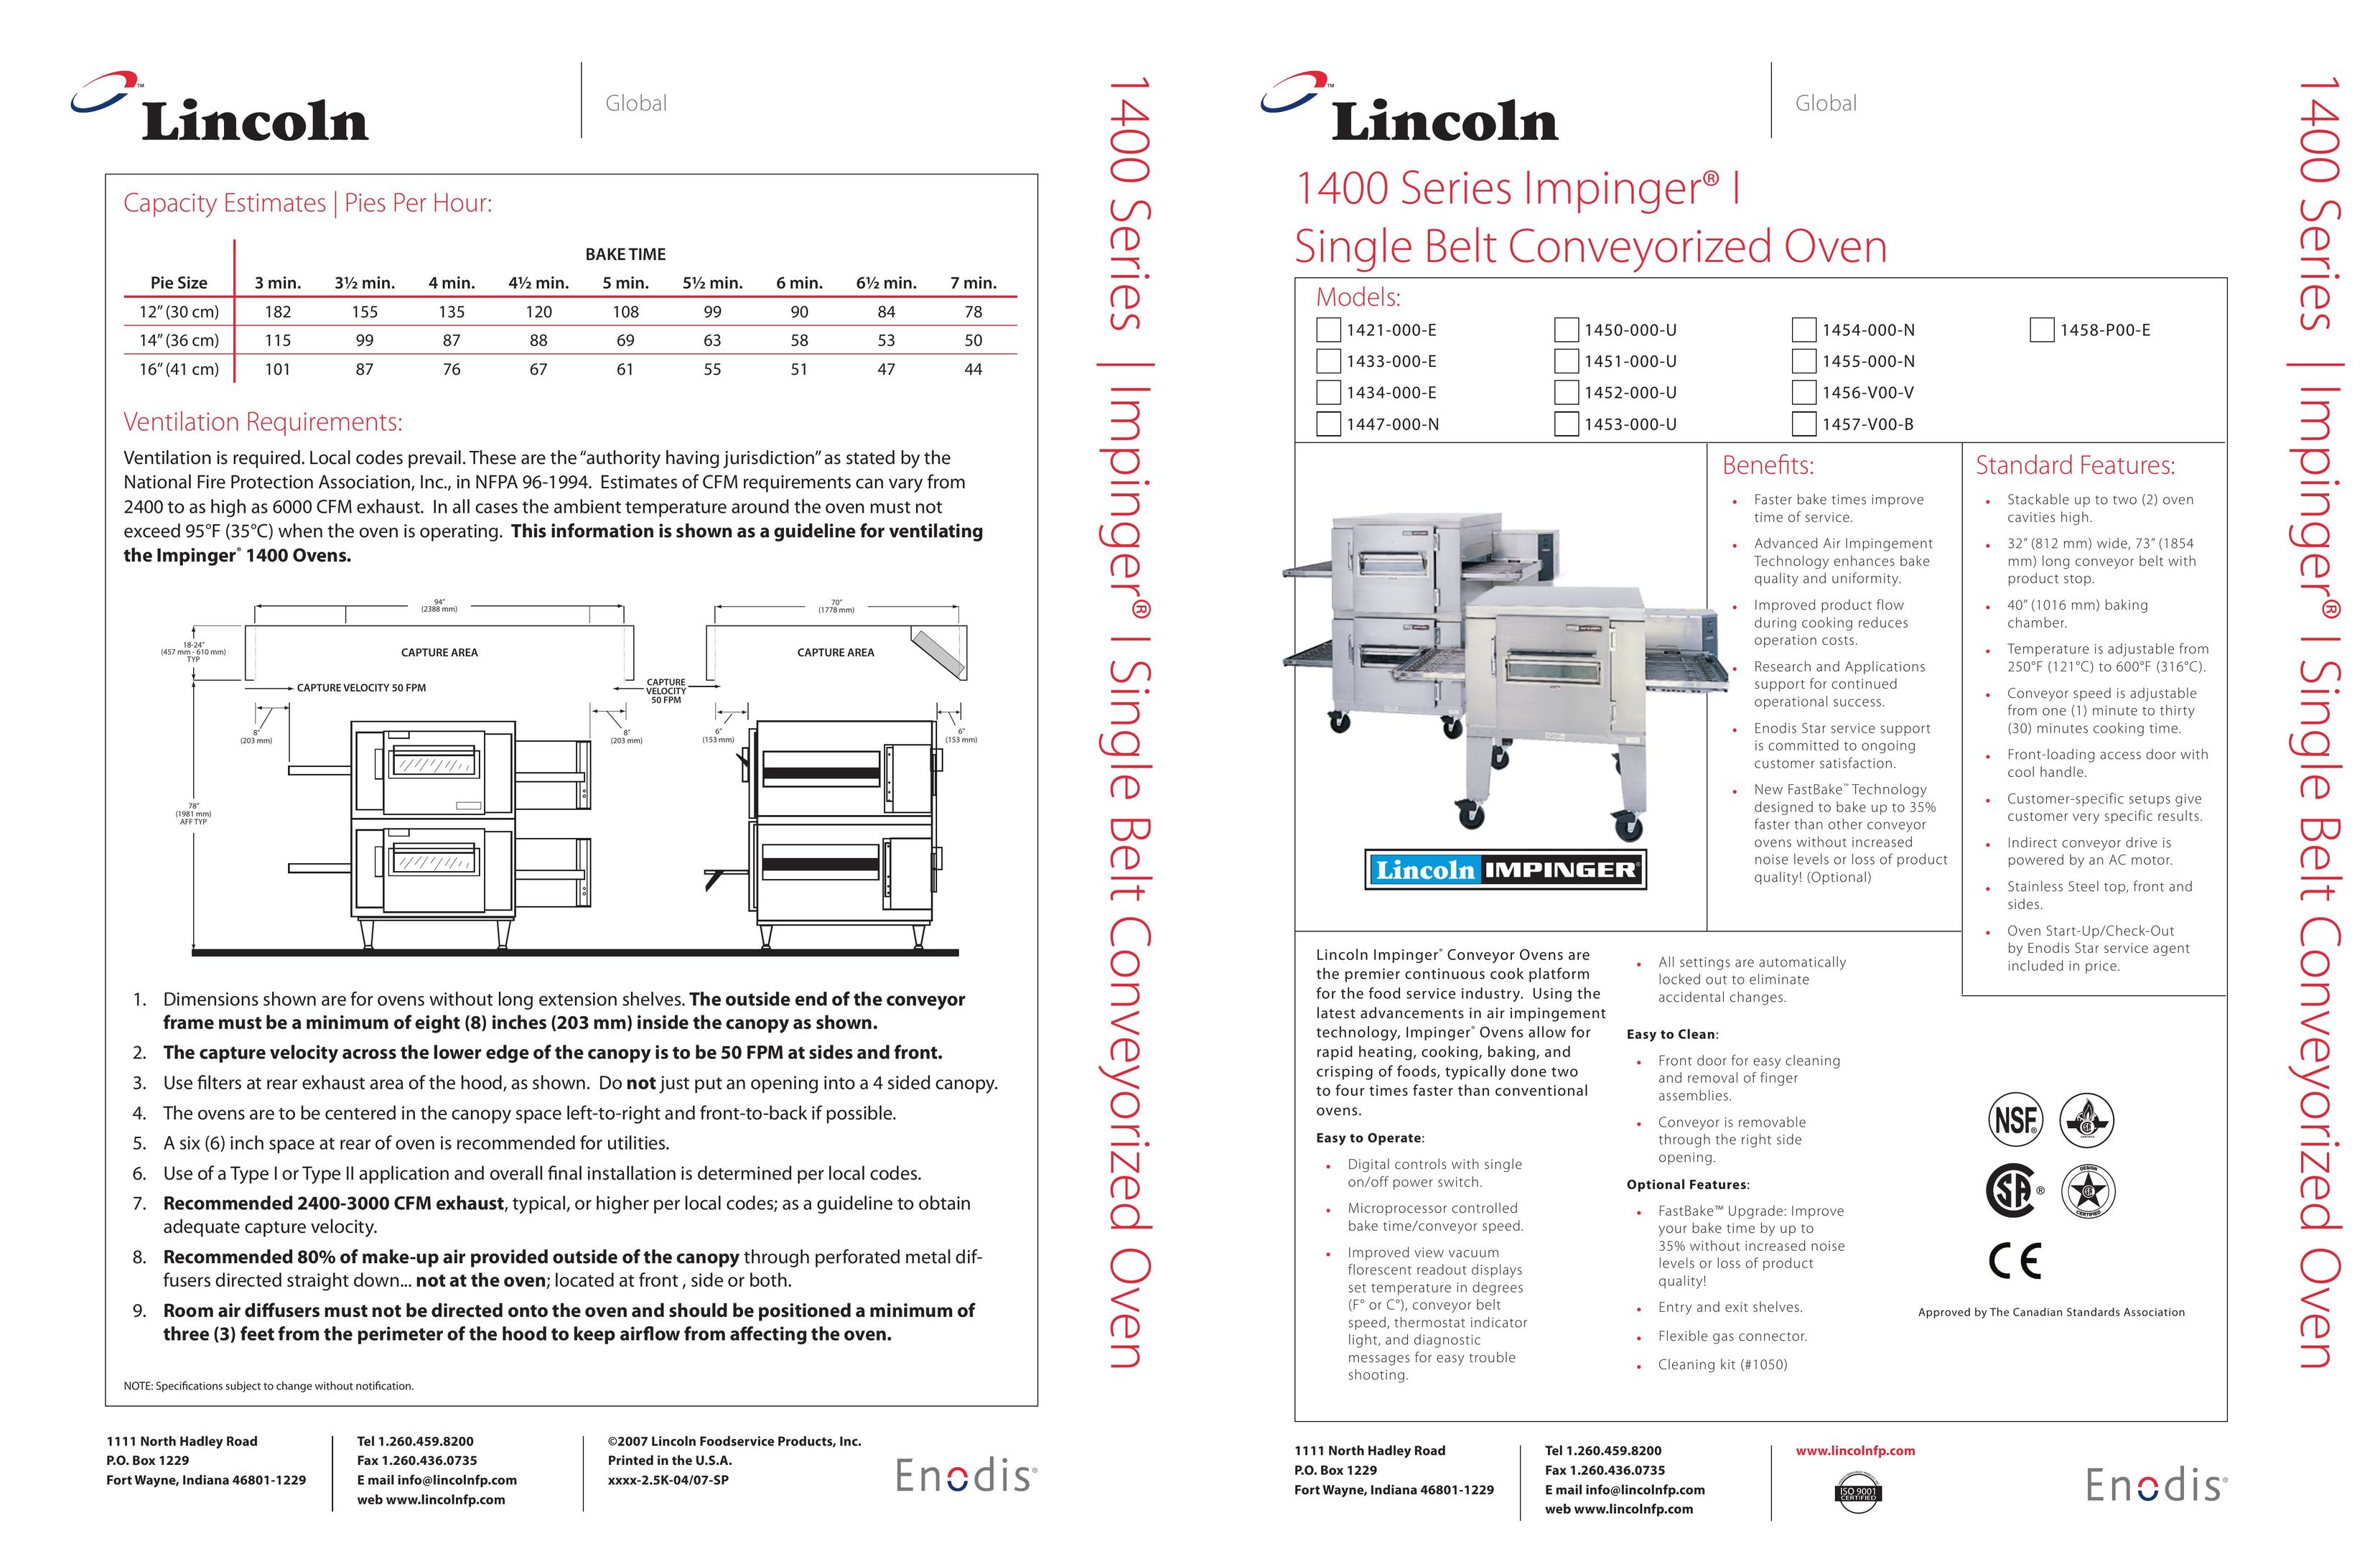 Lincoln 1447-000-N Oven User Manual